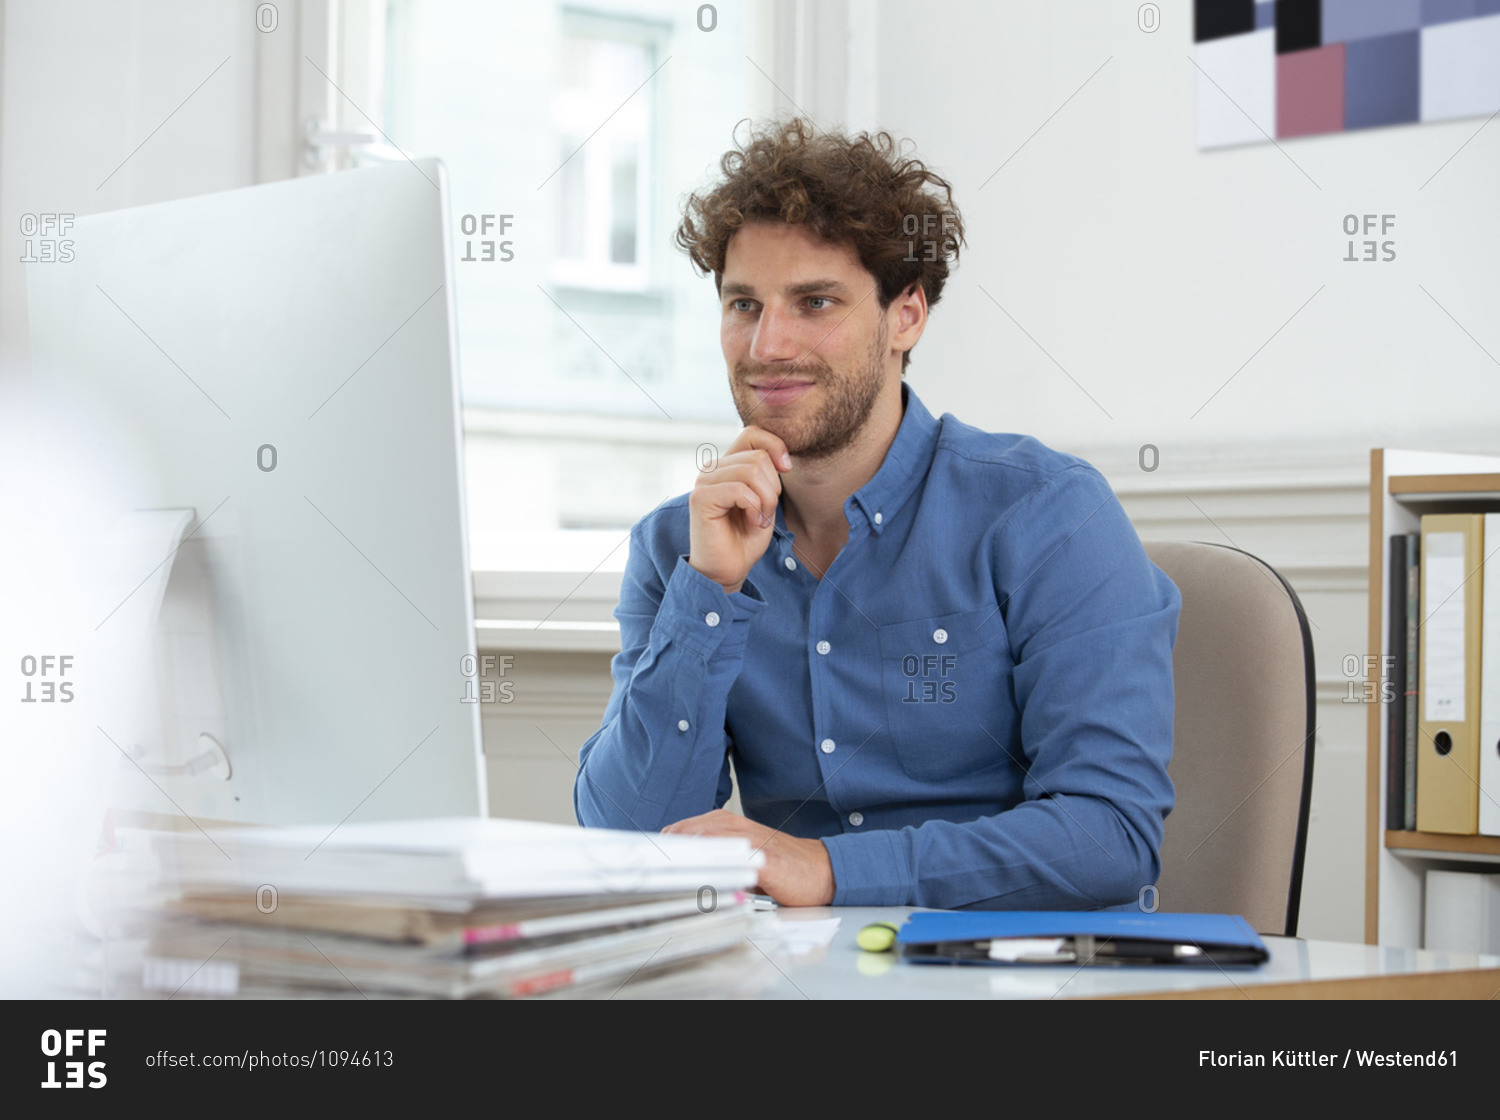 Male professional with hand on chin working over computer in office cabin